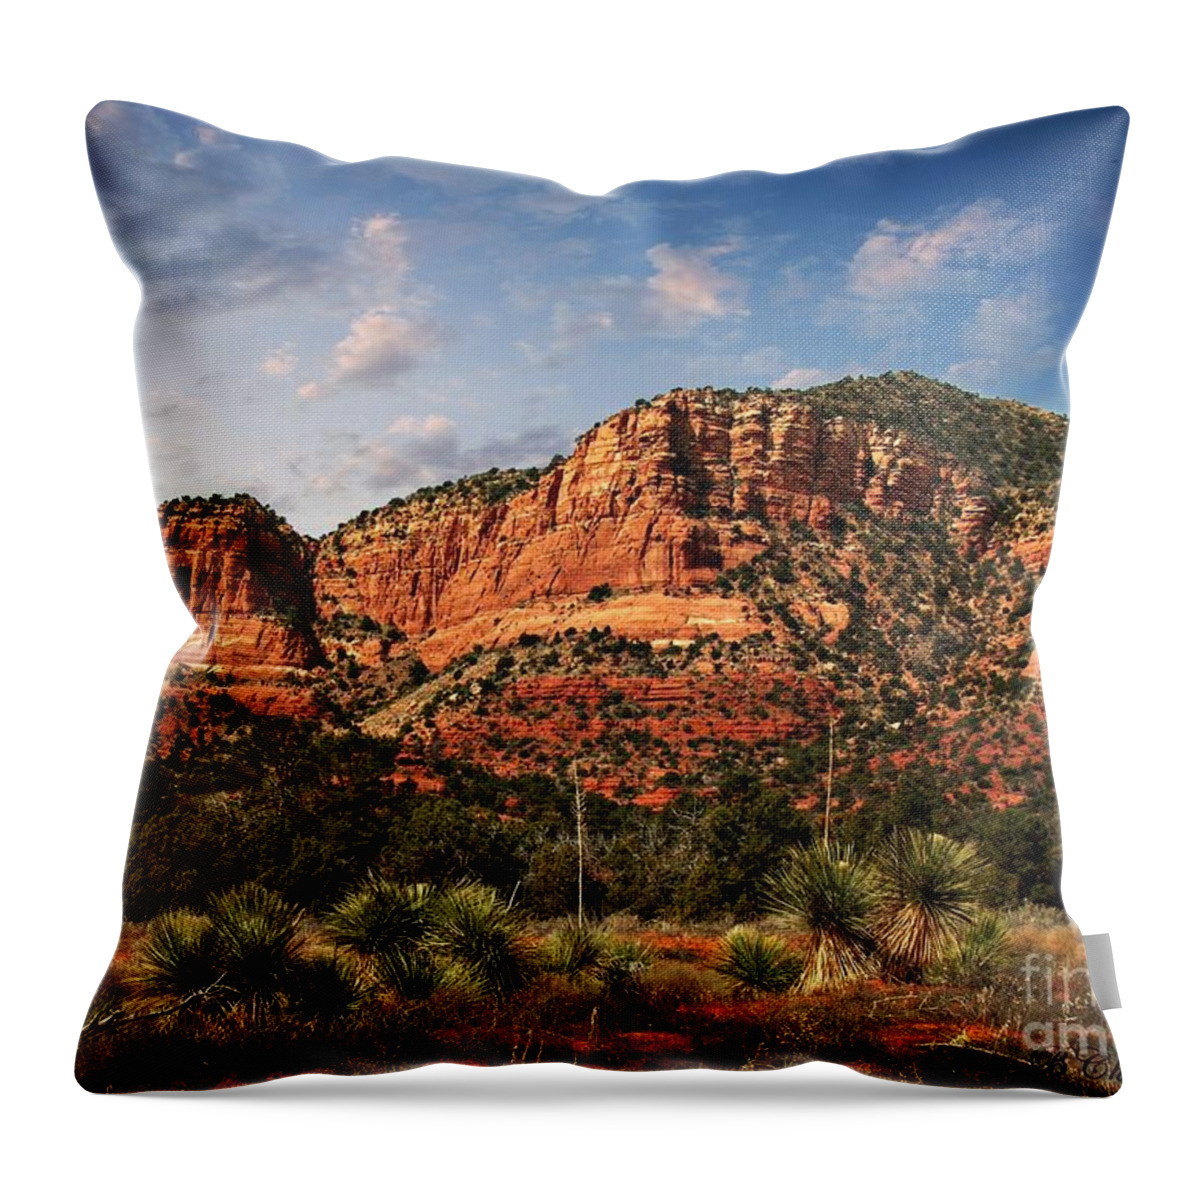 Sedona Arizona Featuring Yucca Plants The Vortex And Red Rock Landscape Scenery Throw Pillow featuring the photograph Sedona Vortex and Yucca by Barbara Chichester